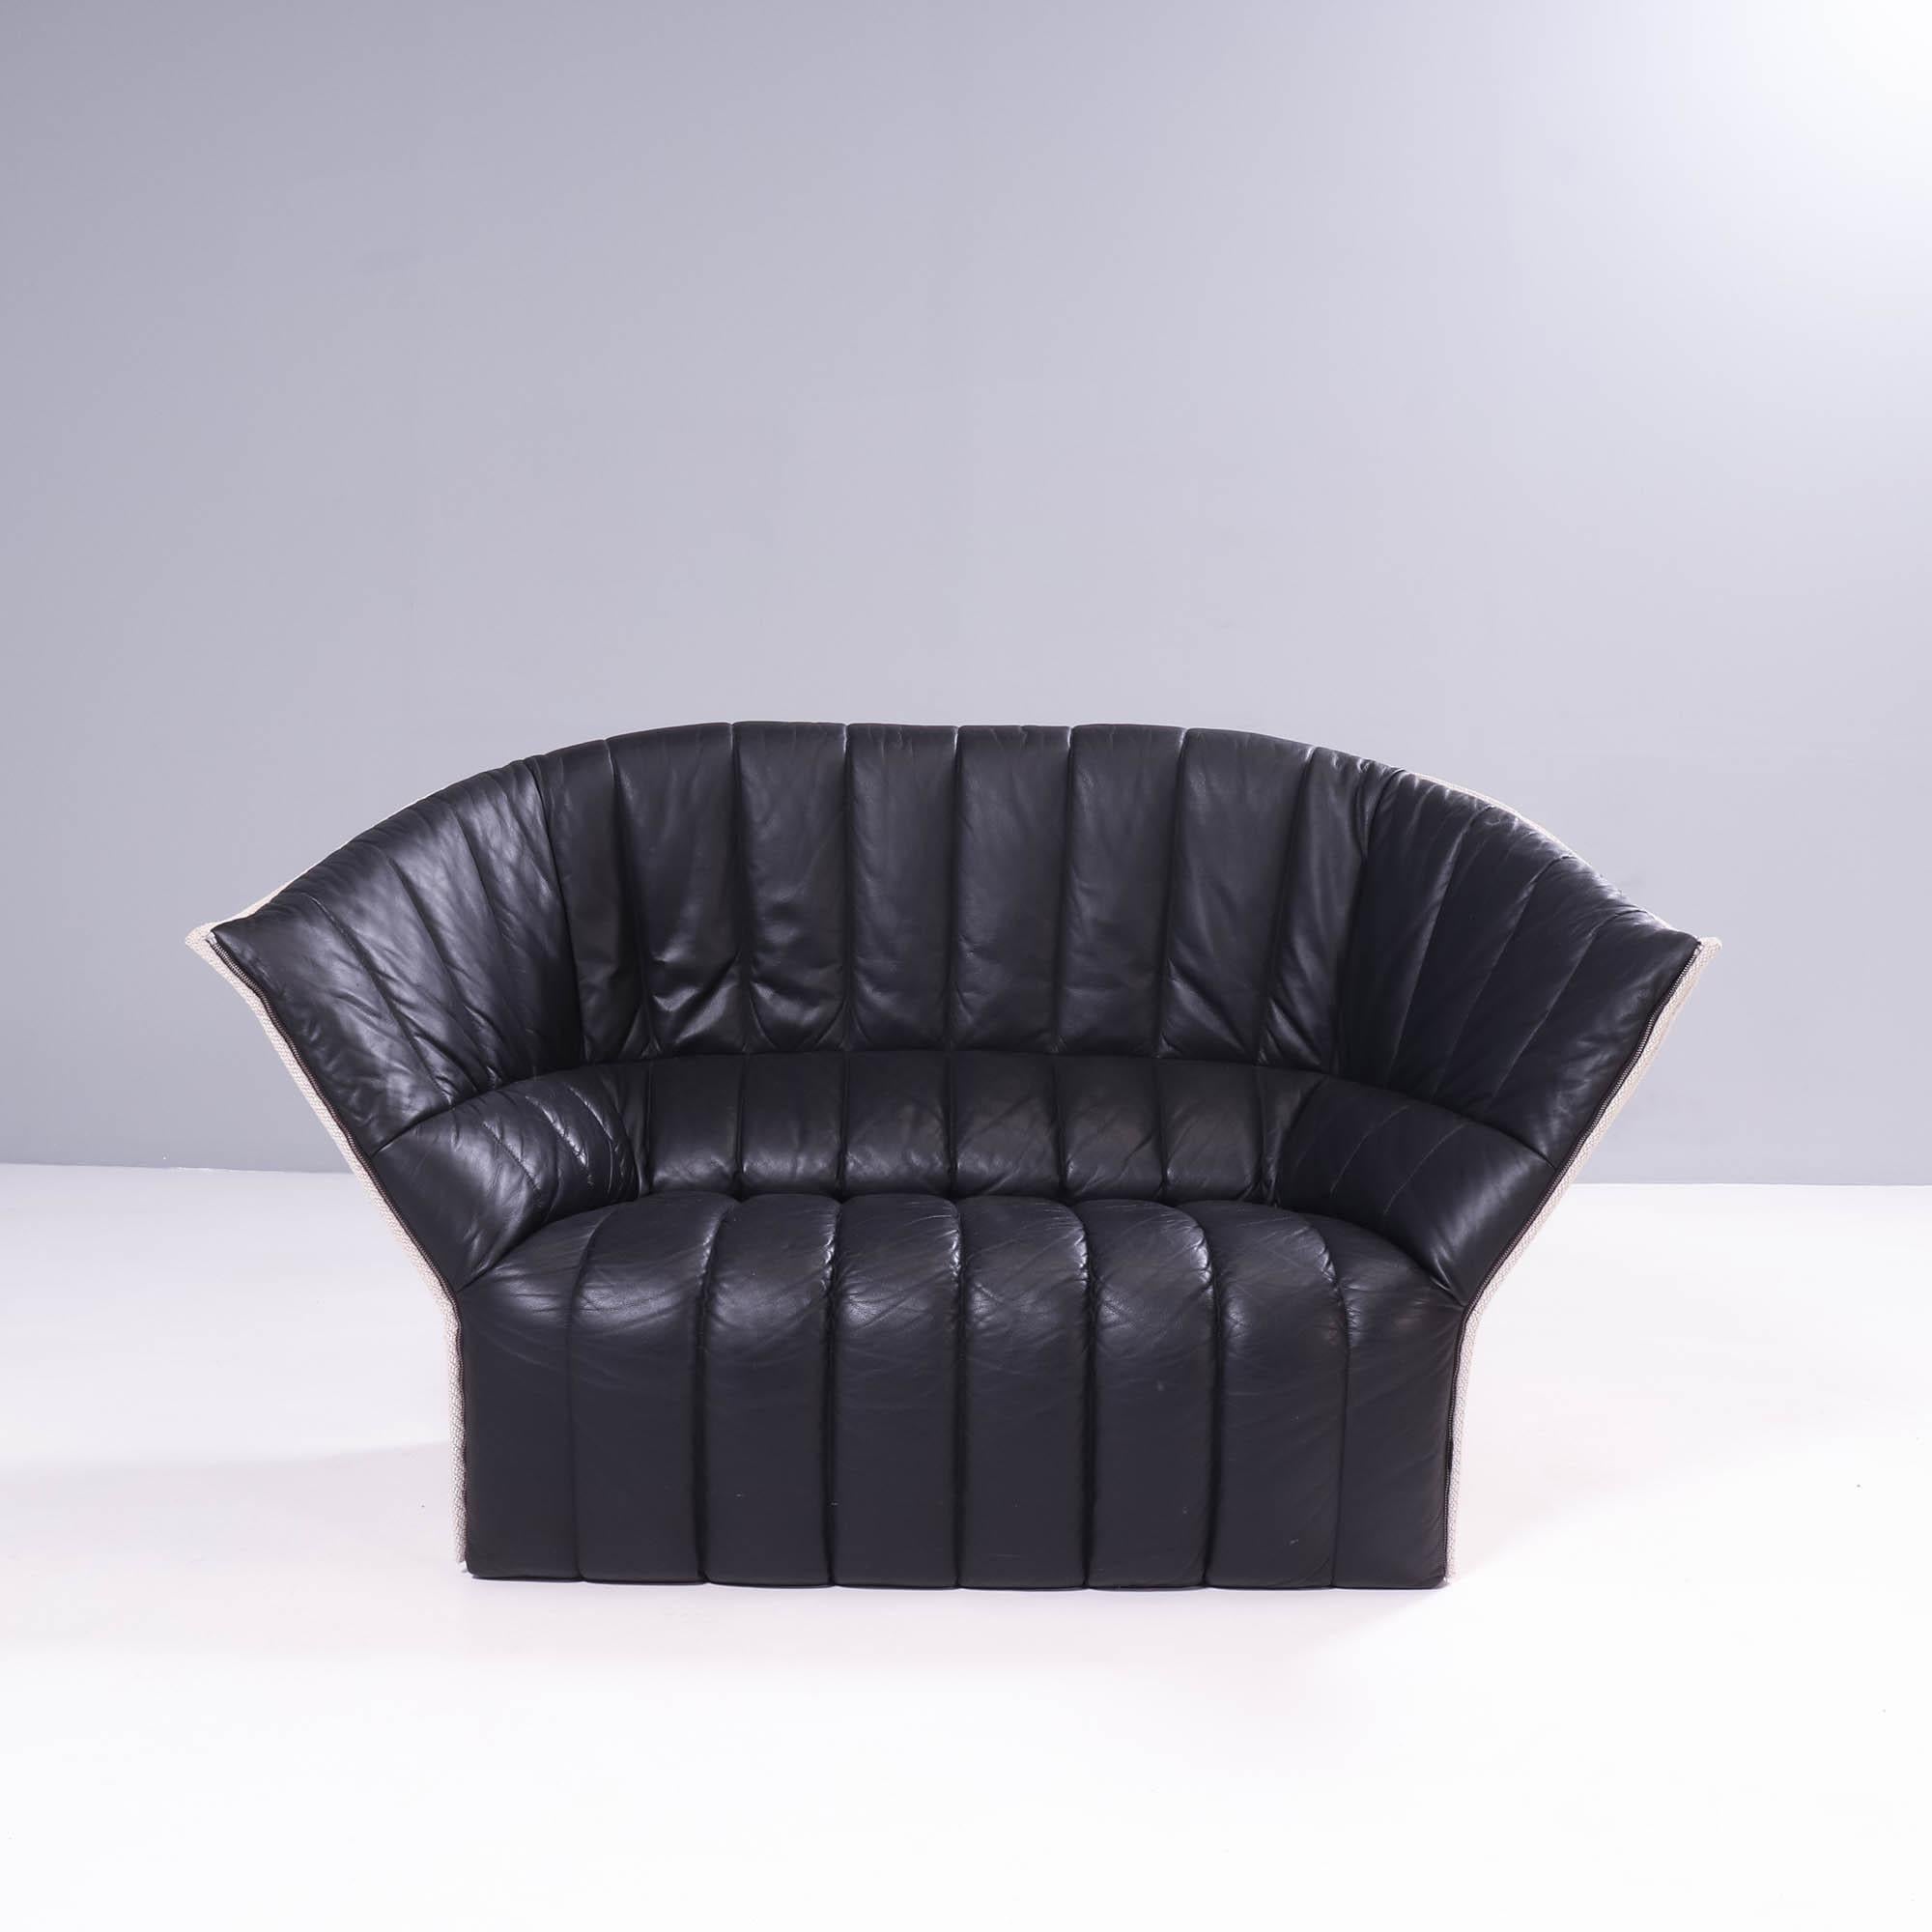 Designed by Inga Sempé for Ligne Roset, the Moel loveseat is a striking piece of contemporary design.

With a shell-like silhouette, the Moel loveseat sofa features a quilted seat front in supple black leather and a contrasting white fabric